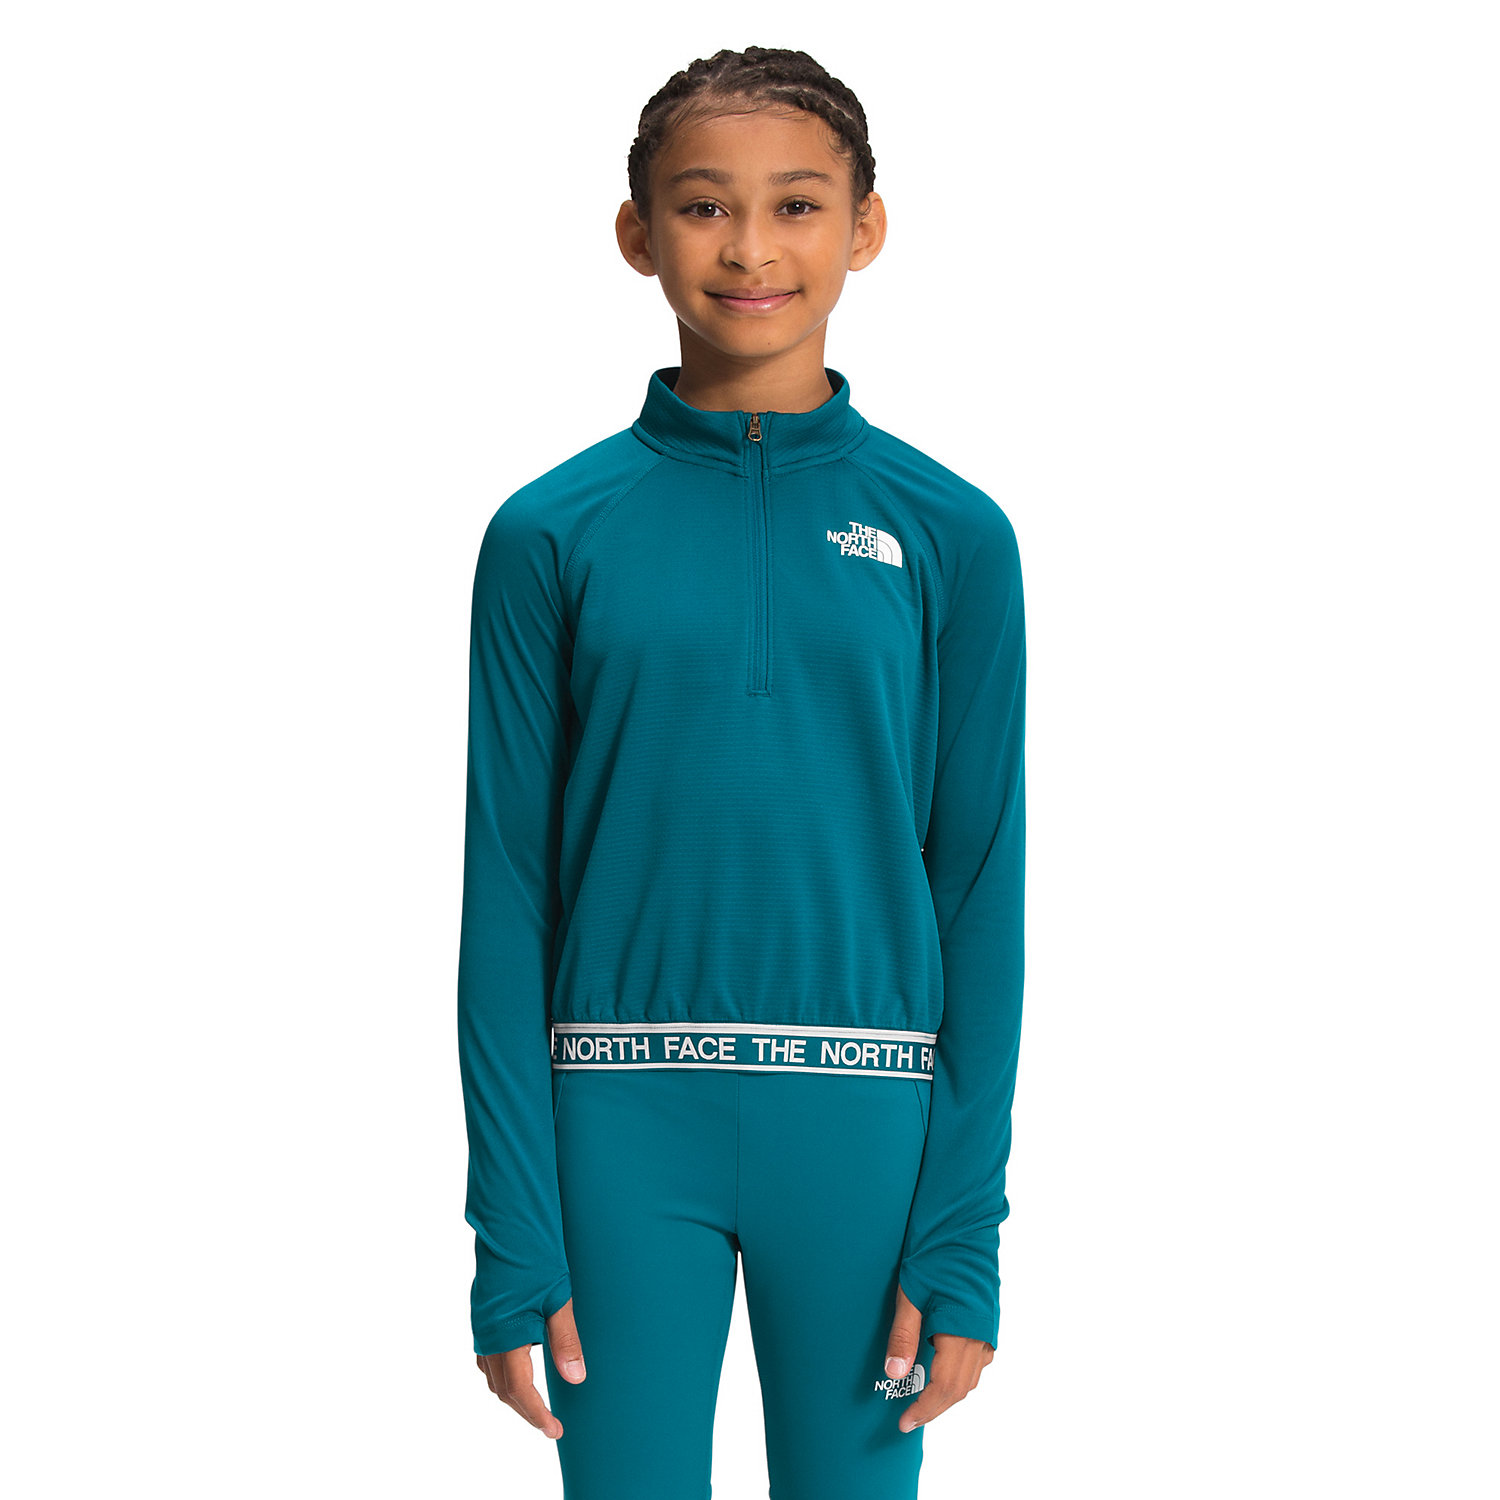 The North Face Girls Reactor Thermal 1/4 Zip Top